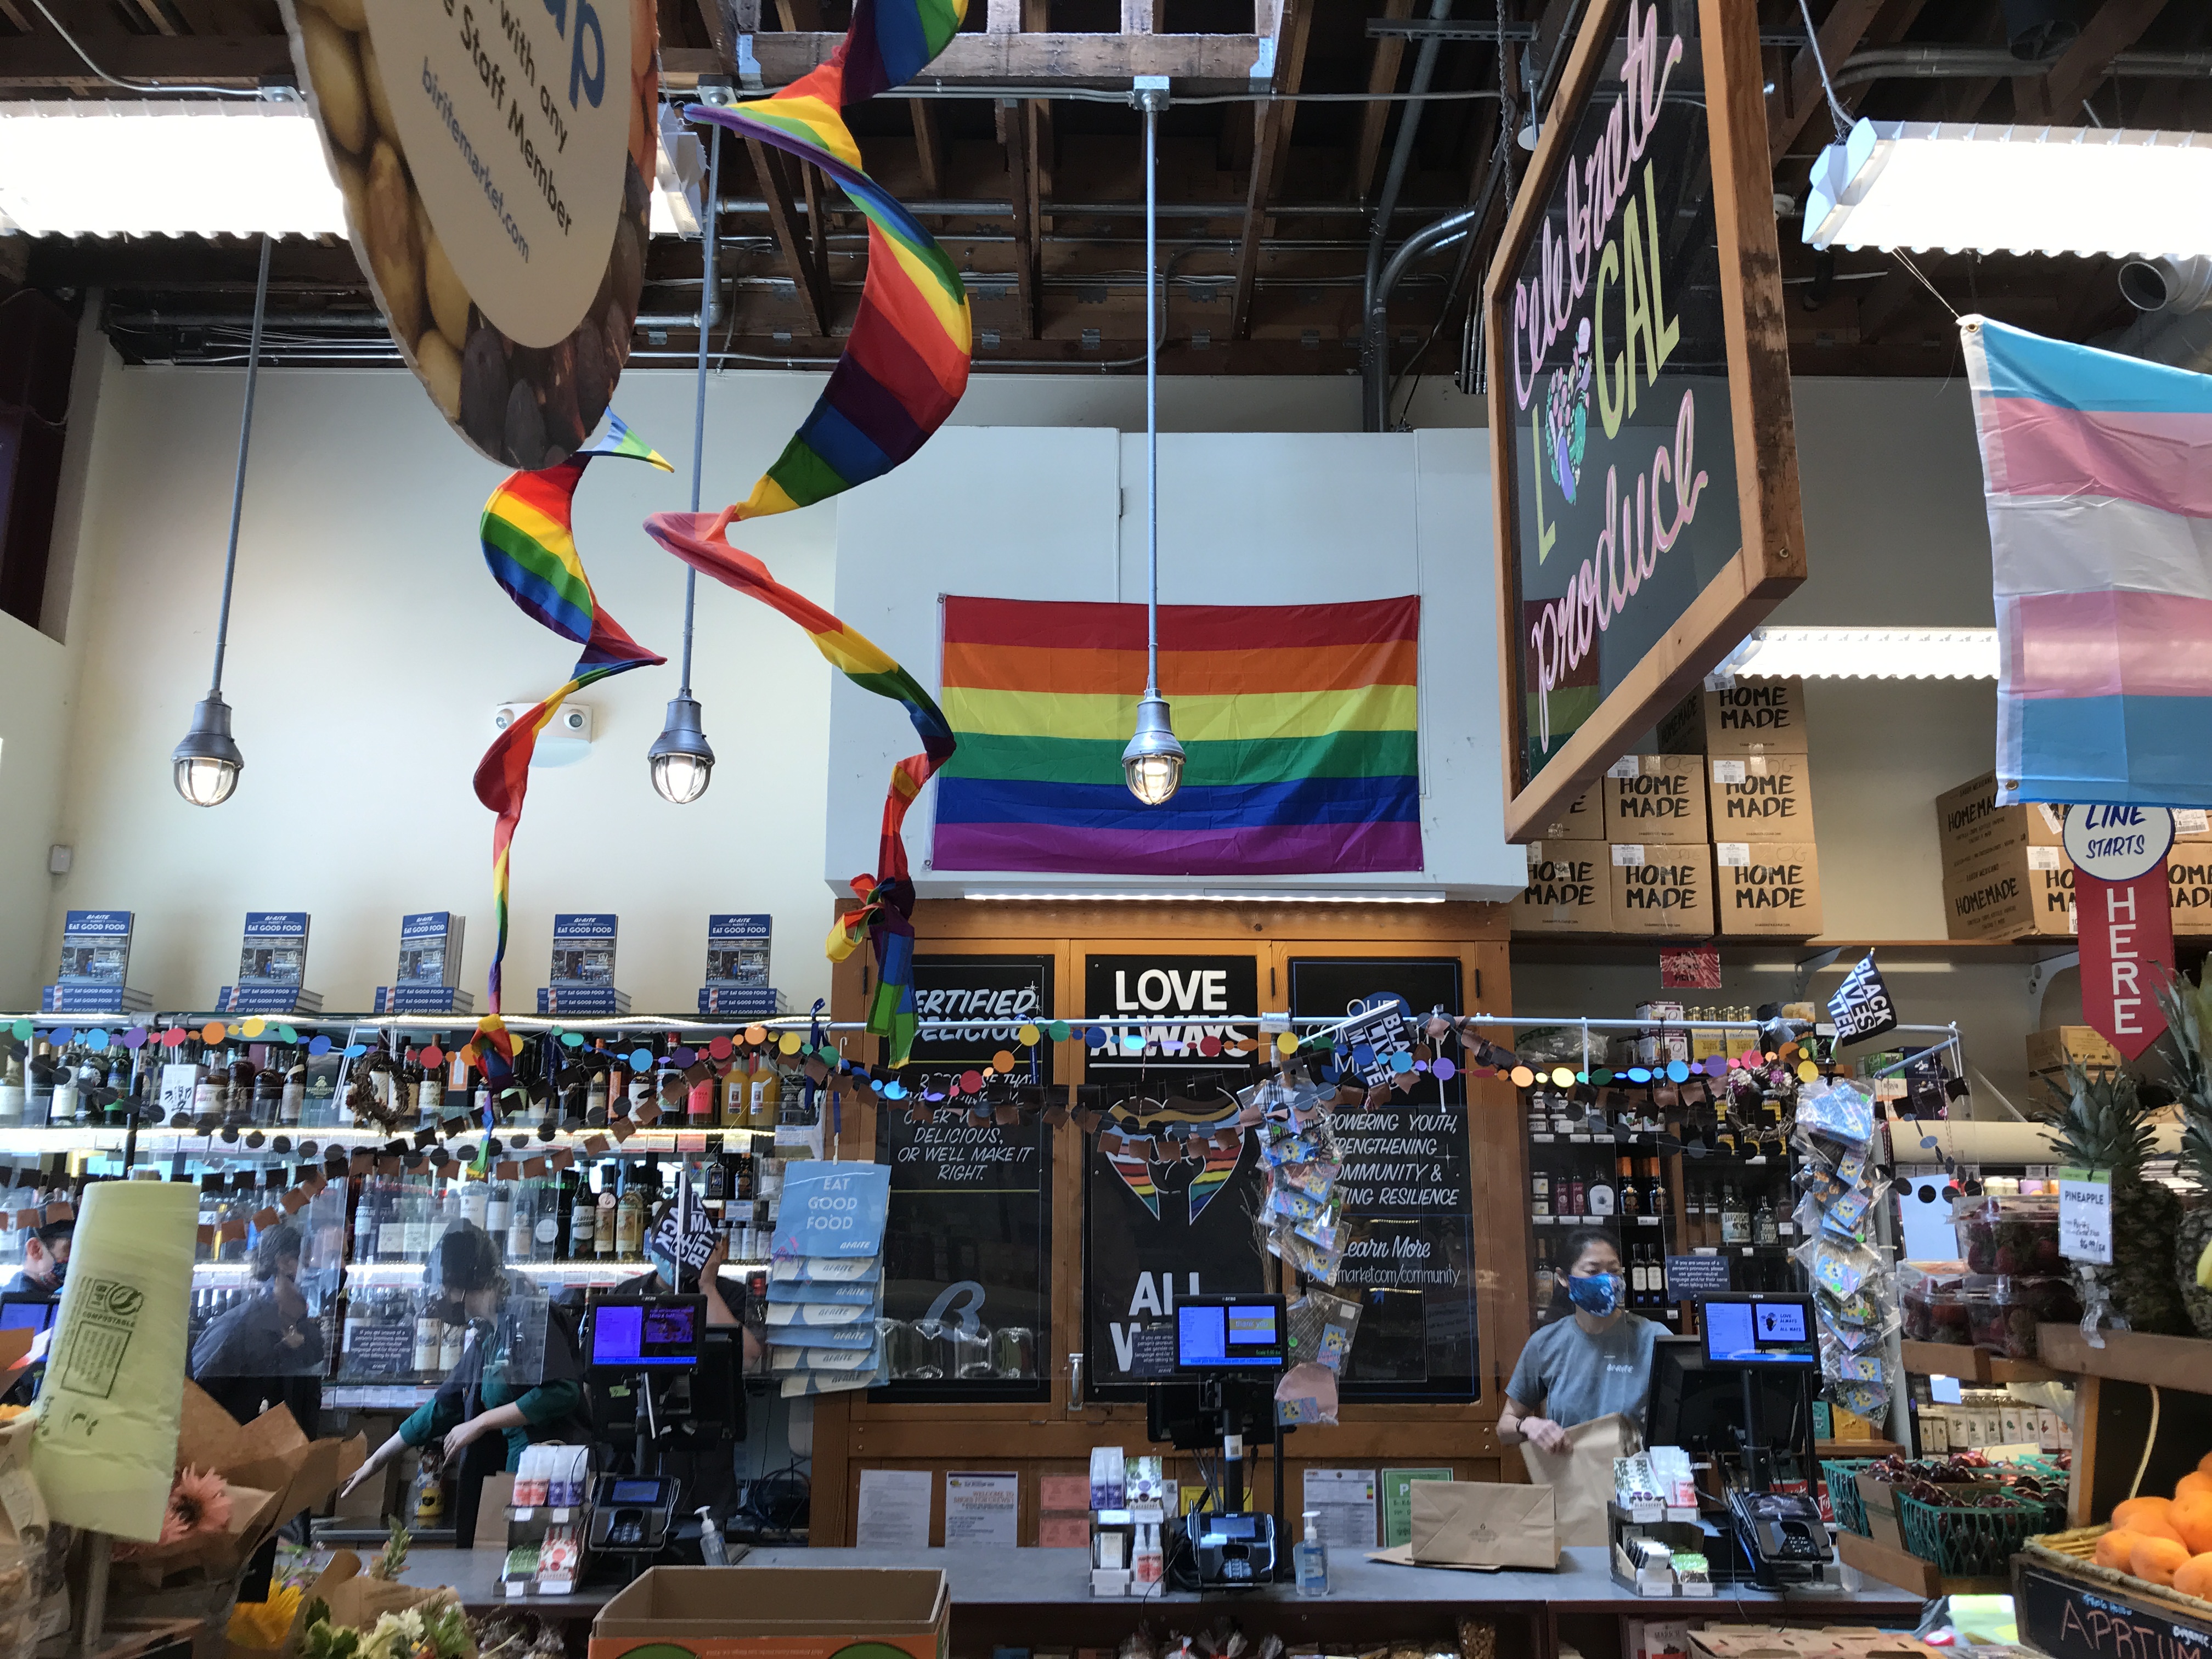 The interior of the Bi-Rite grocery store has rainbow streamers and flags, plus a light blue, light pink, and white transgender flag. Bi-Rite on Divisadero Street, San Francisco, California, United States of America